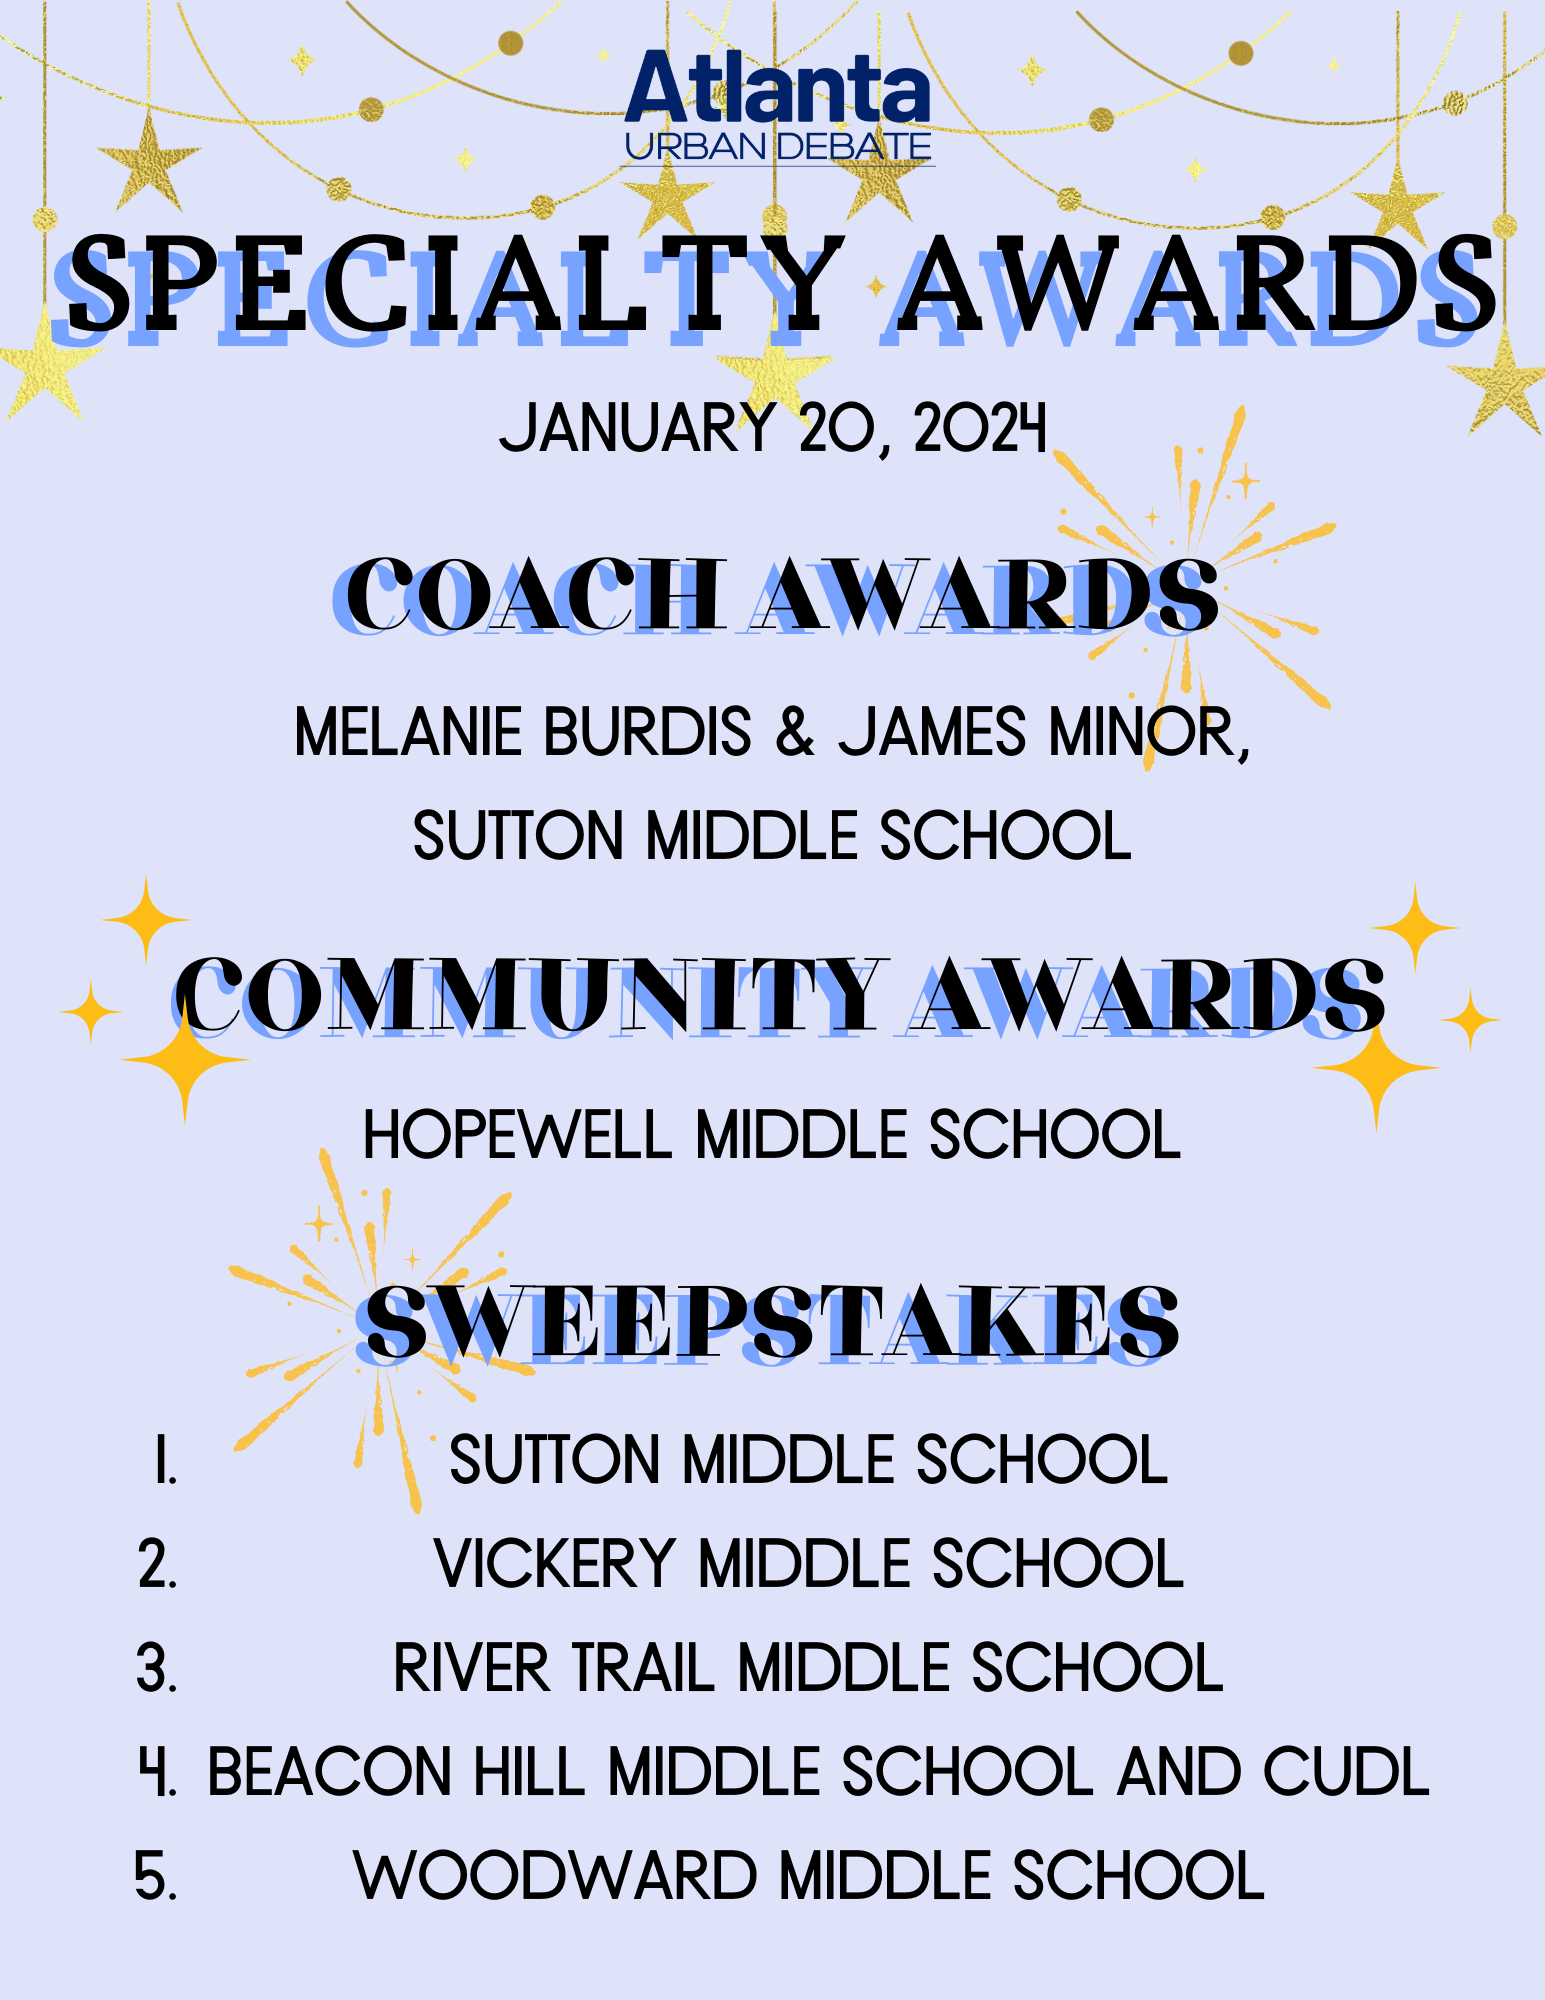 Jan 20, '24 Specialty Awards.png